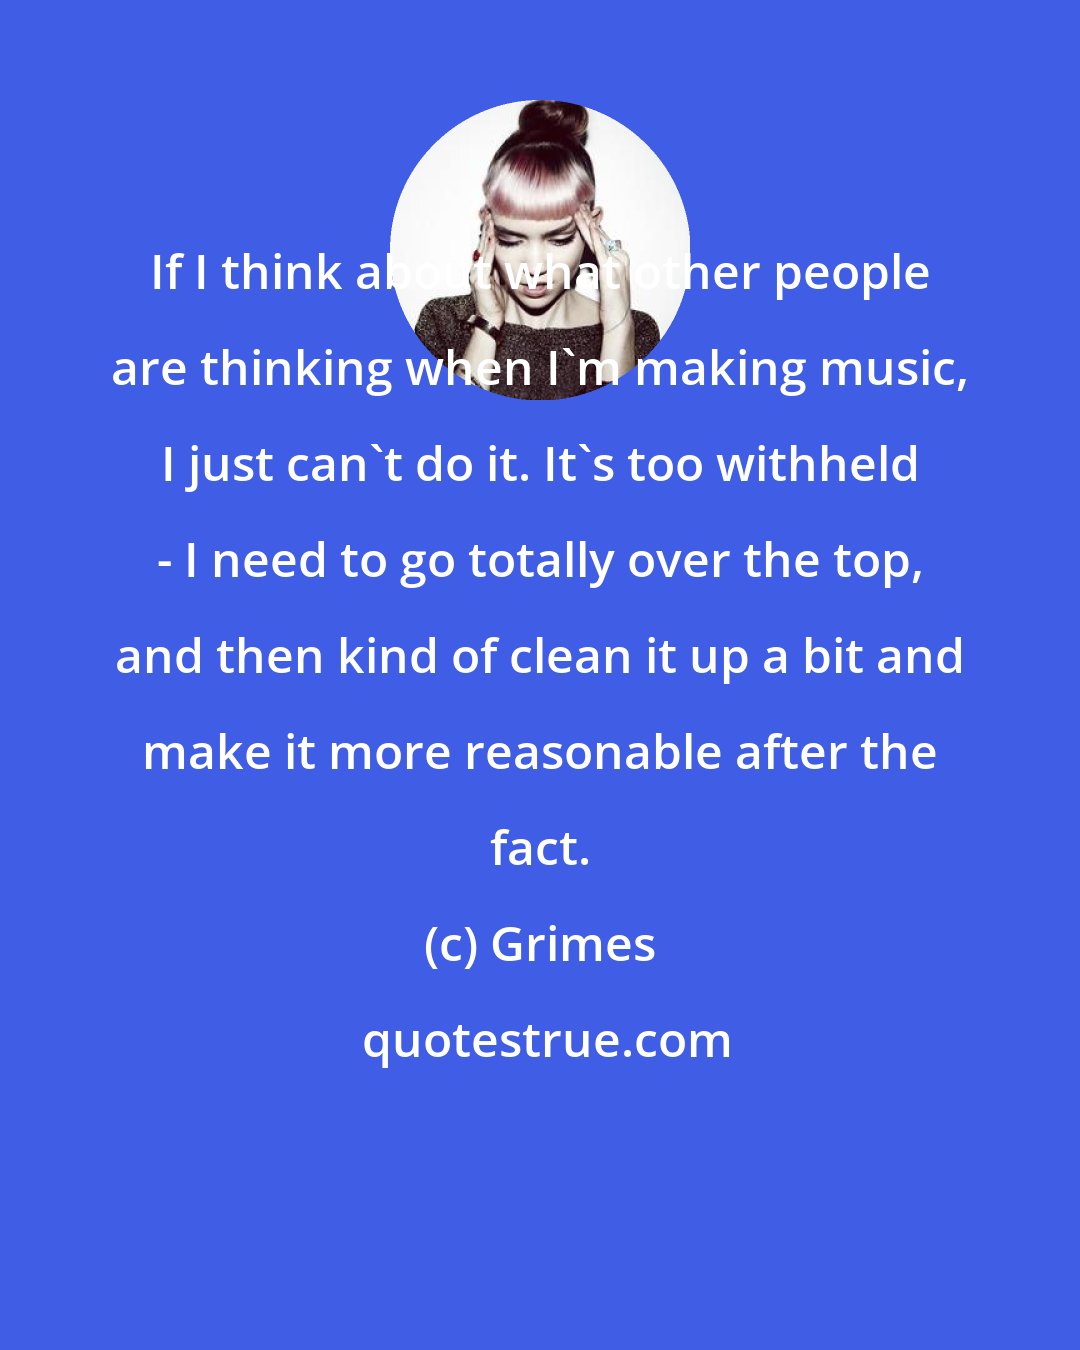 Grimes: If I think about what other people are thinking when I'm making music, I just can't do it. It's too withheld - I need to go totally over the top, and then kind of clean it up a bit and make it more reasonable after the fact.